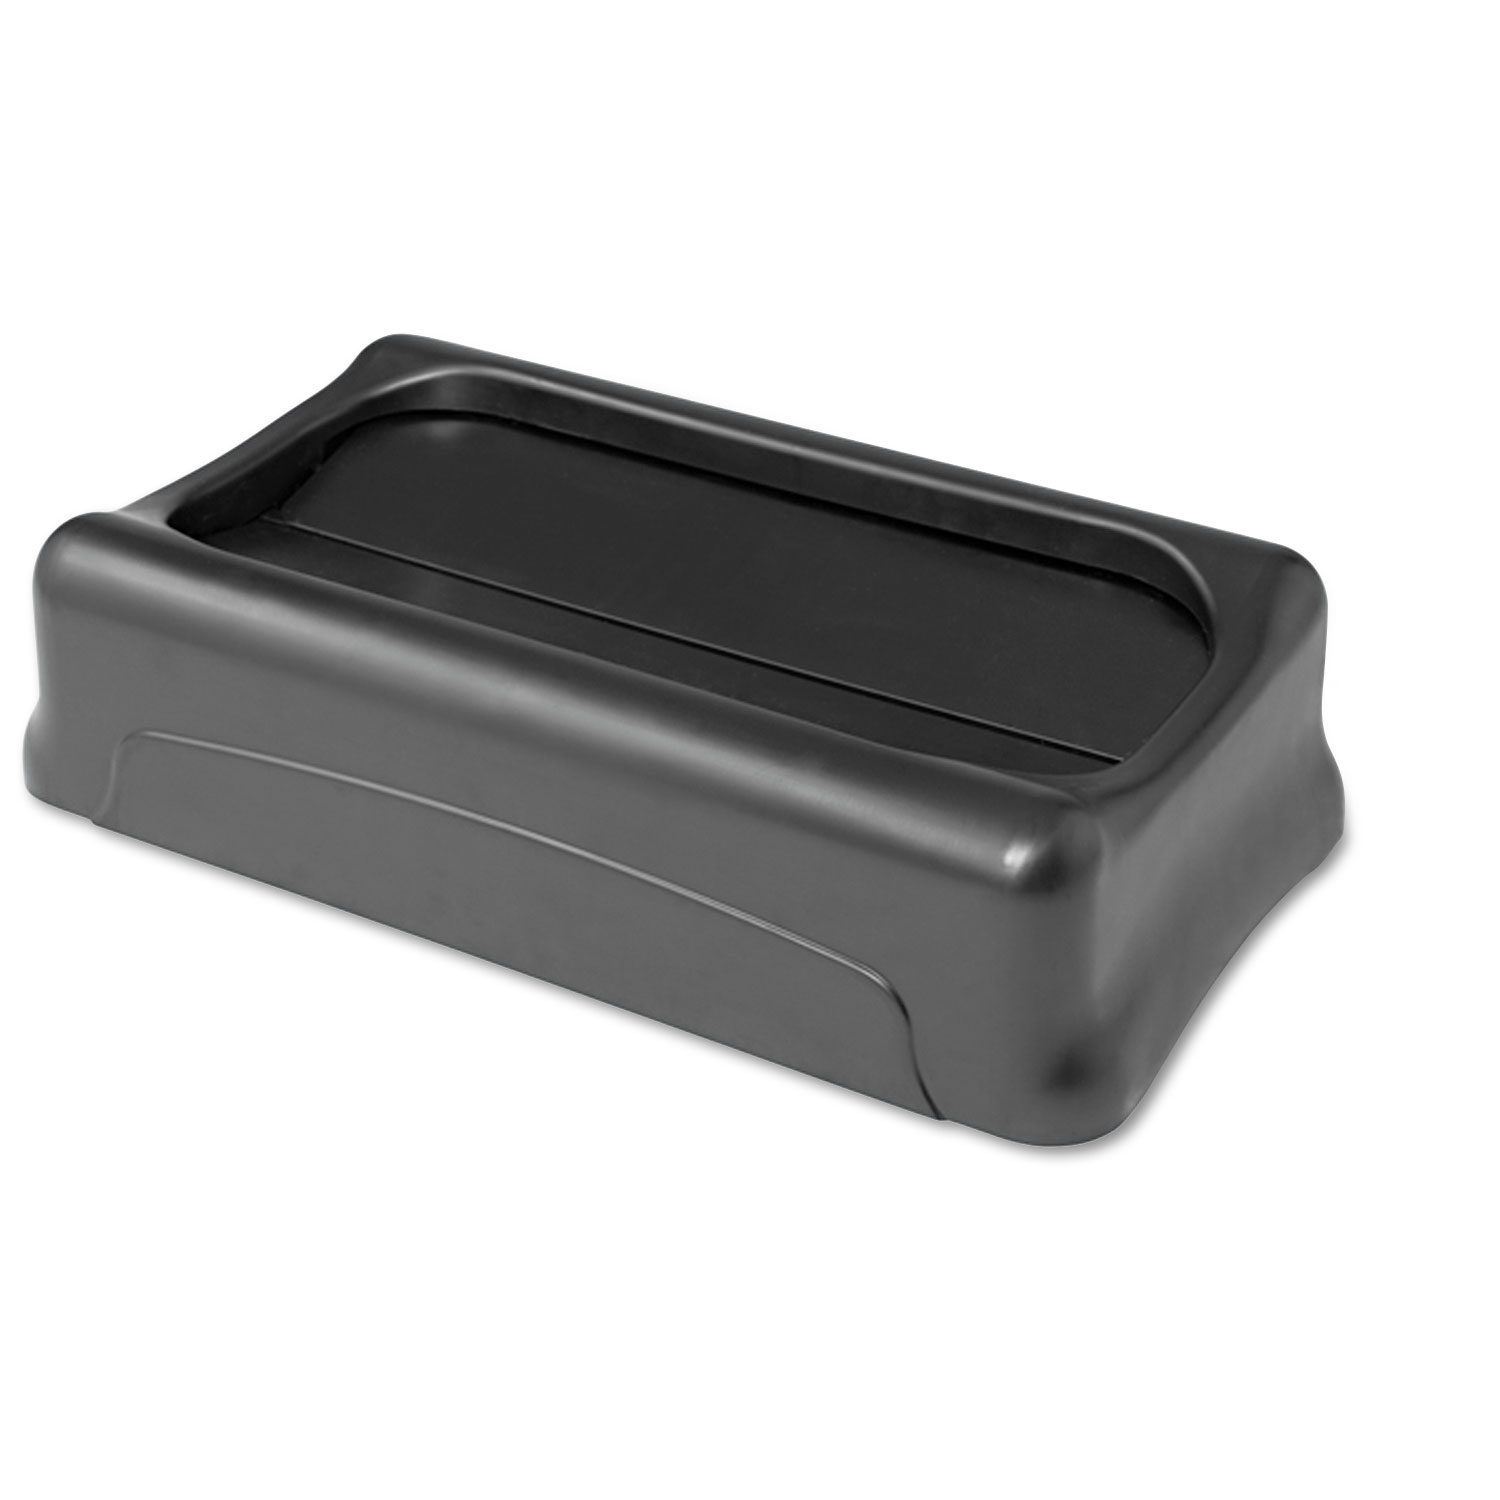 Swing Top Lid for Slim Jim Waste Containers, 11.38w x 20.5d x 5h, Plastic, Black